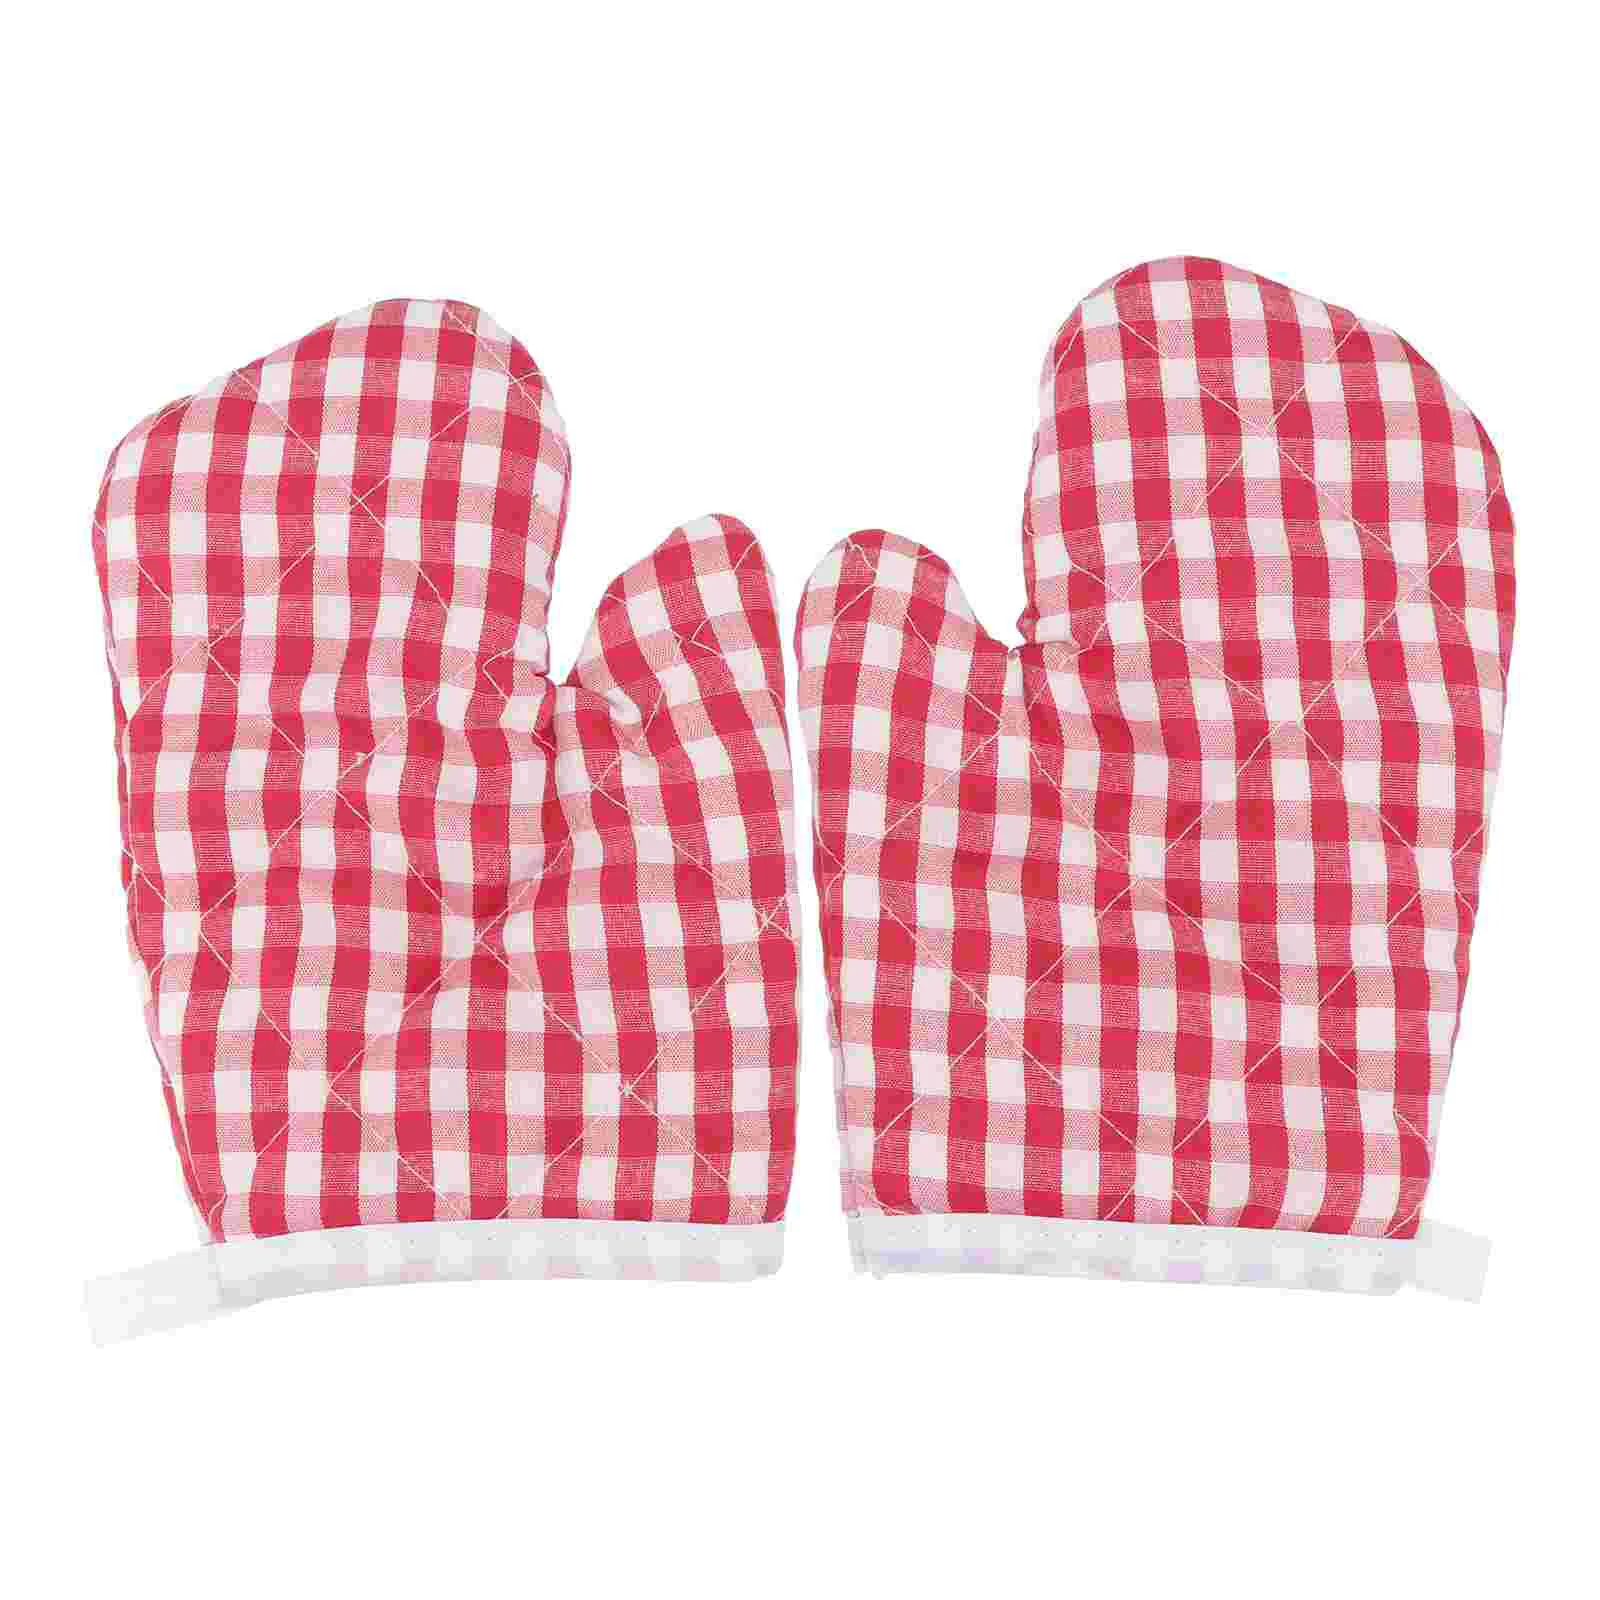 

Bbq Gloves Heat Insulation Kitchen Anti-scald Baking Microwave Oven Mitts for Kids